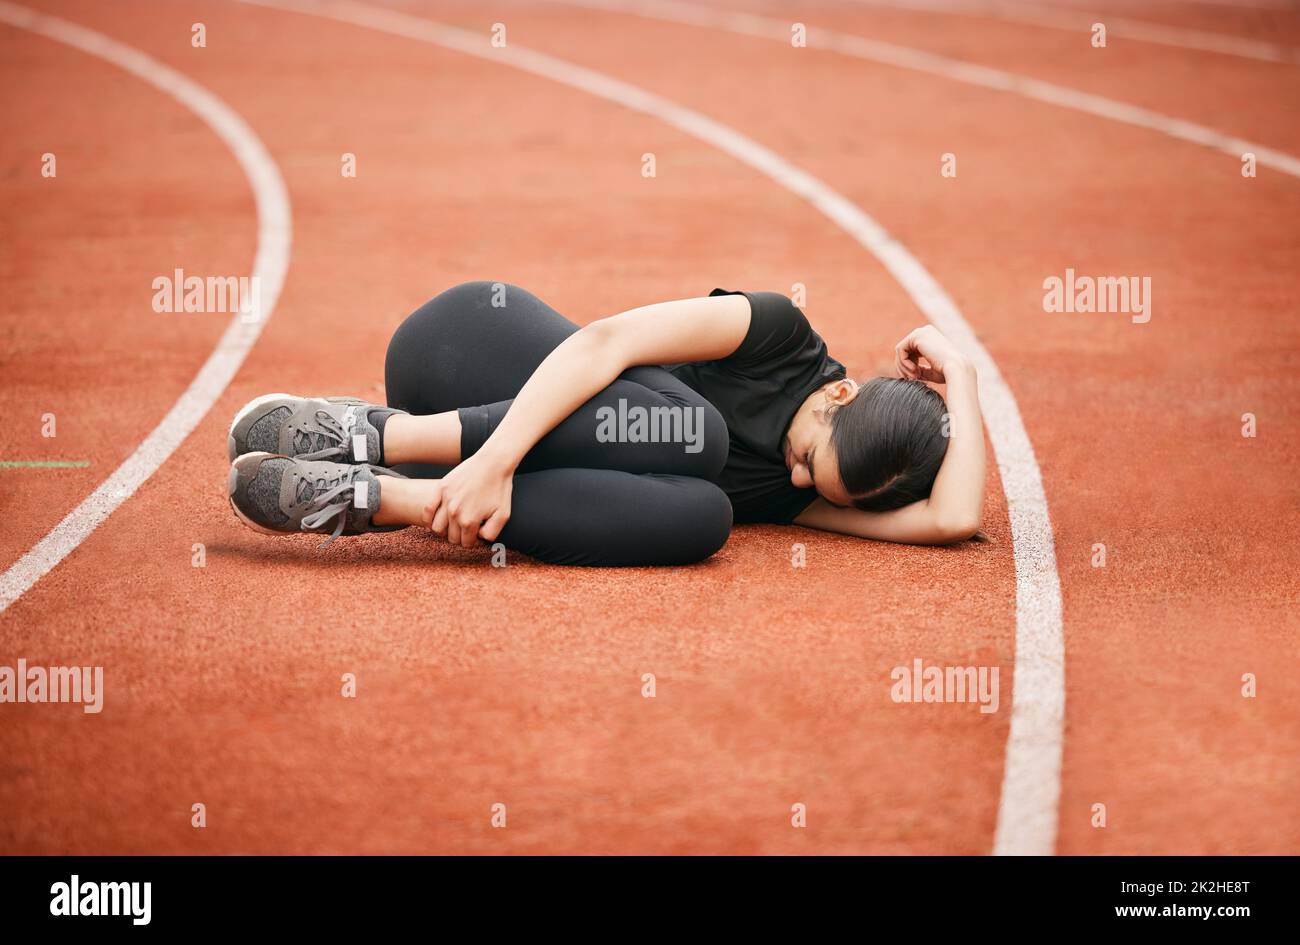 Someone bring me an ice pack. Shot of an athletic young woman suffering from a sports injury while out on the track. Stock Photo